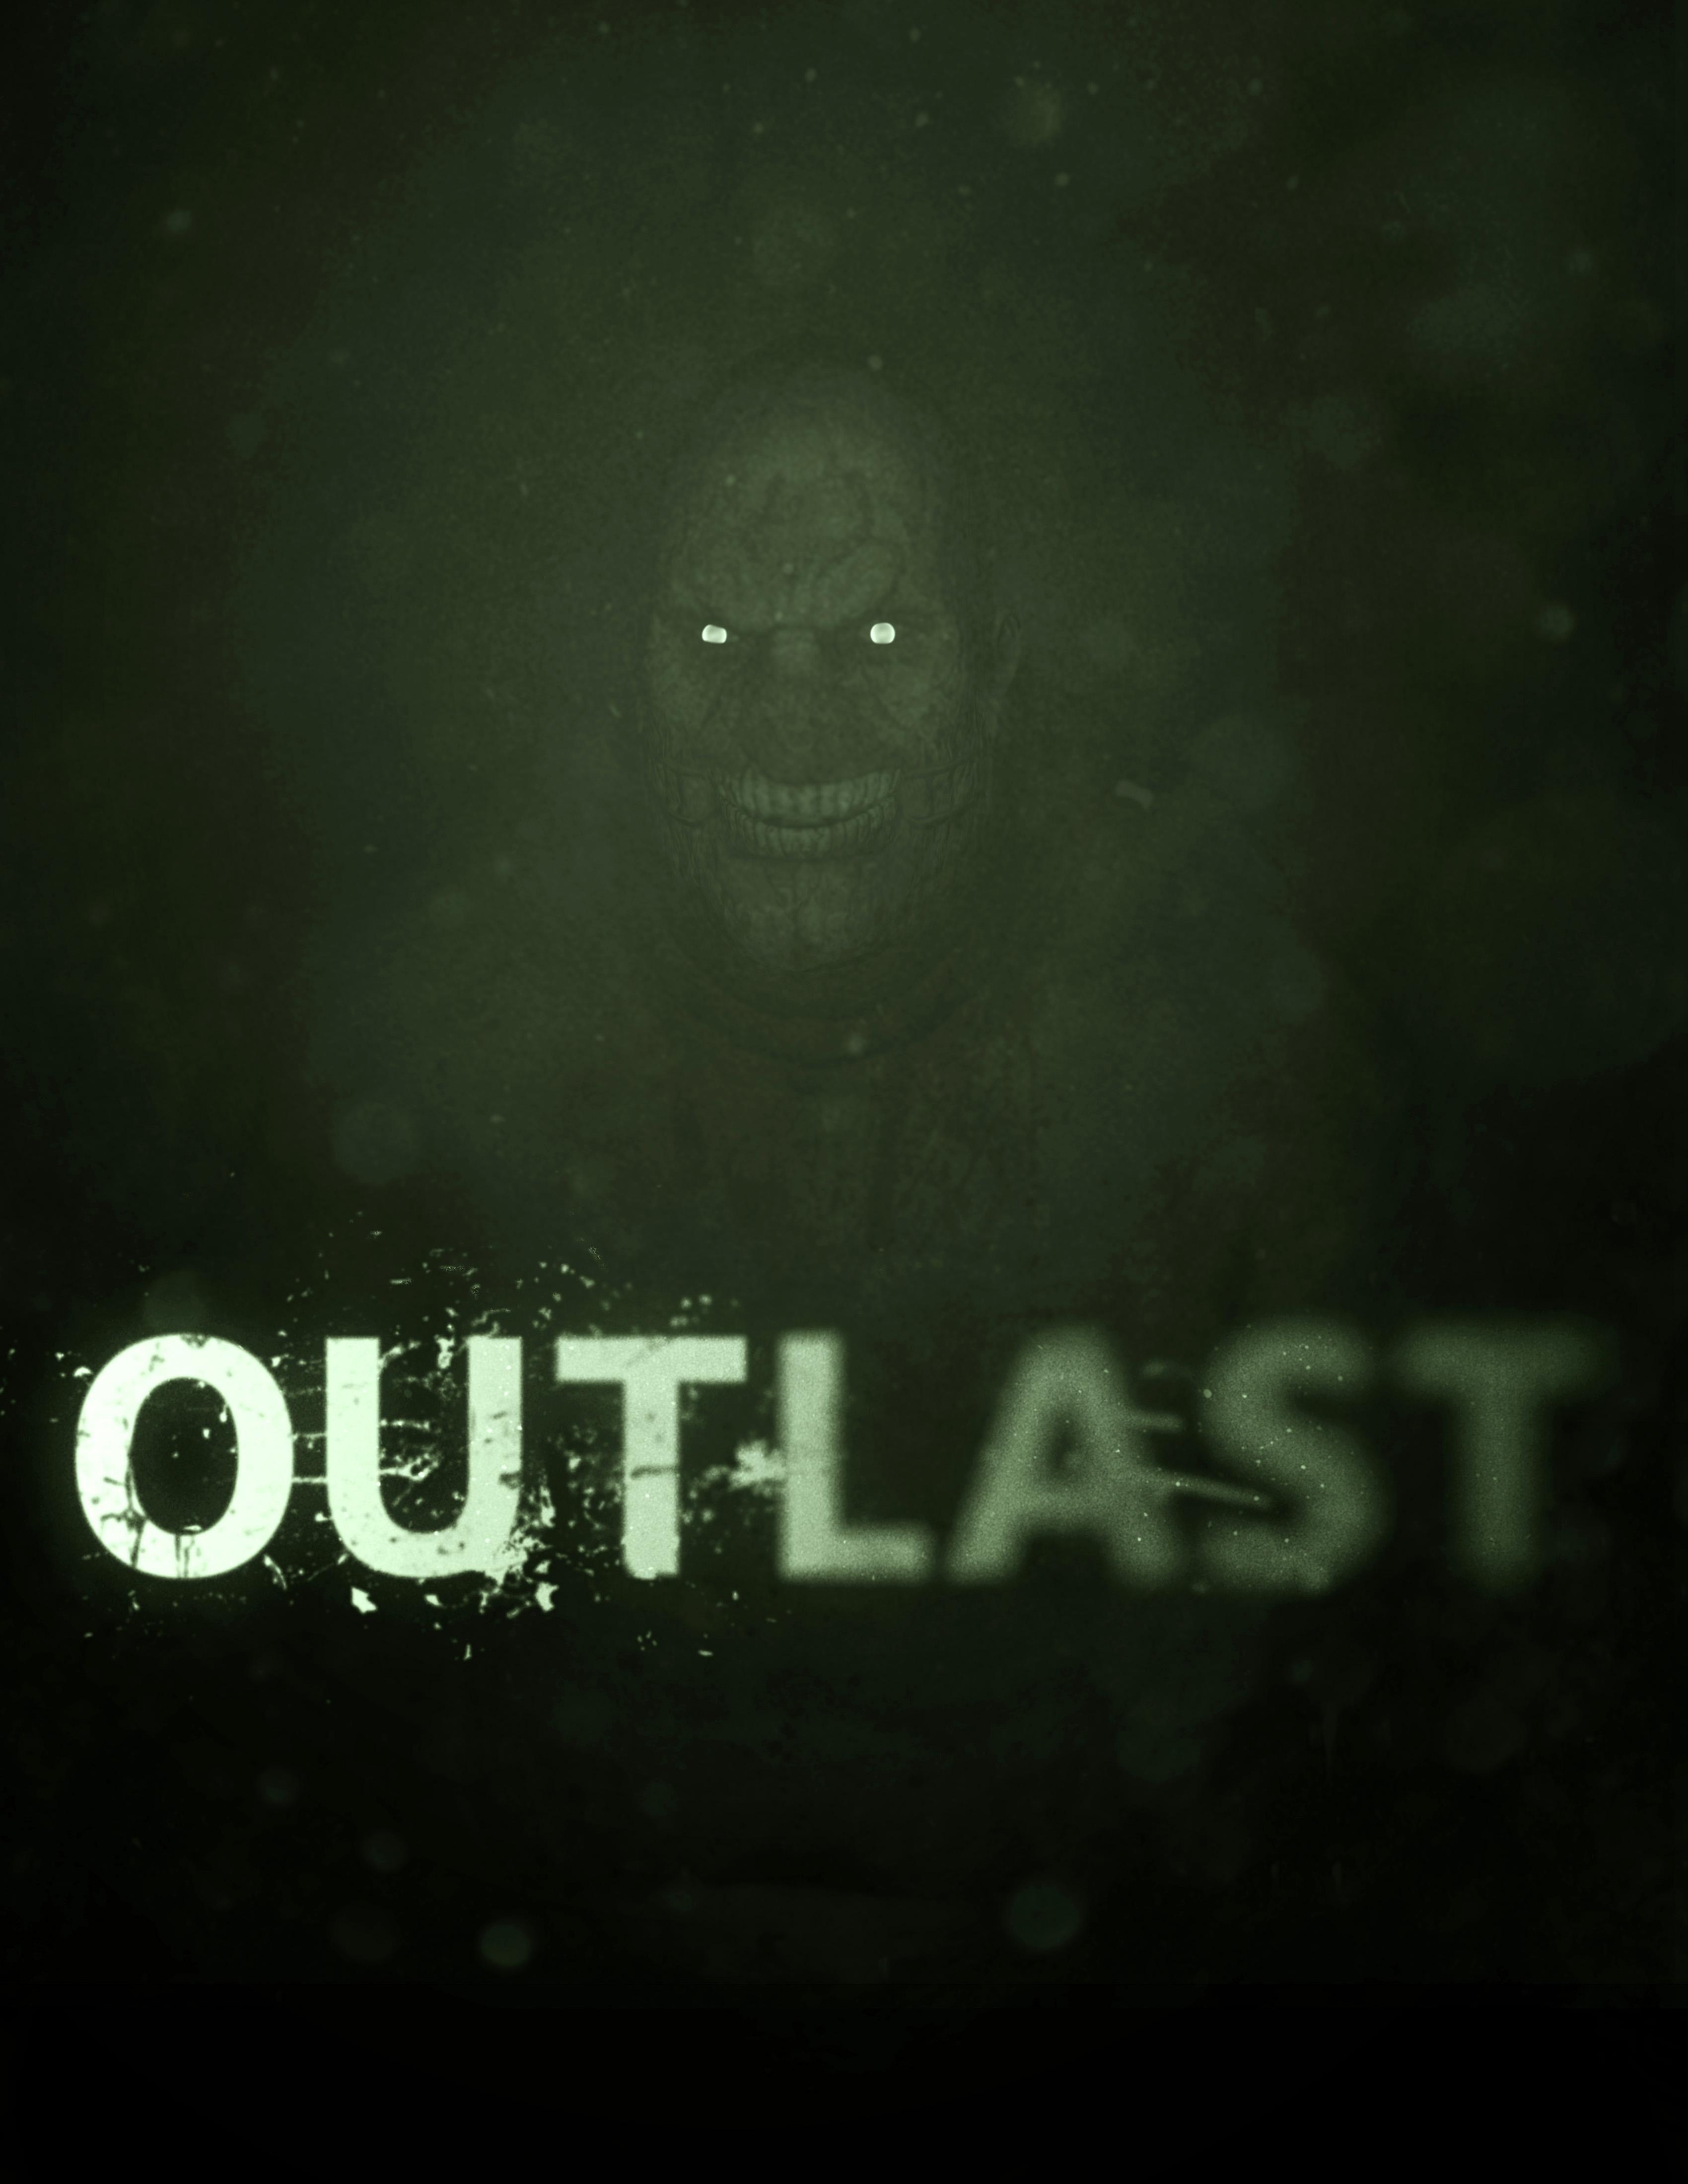 download free outlast